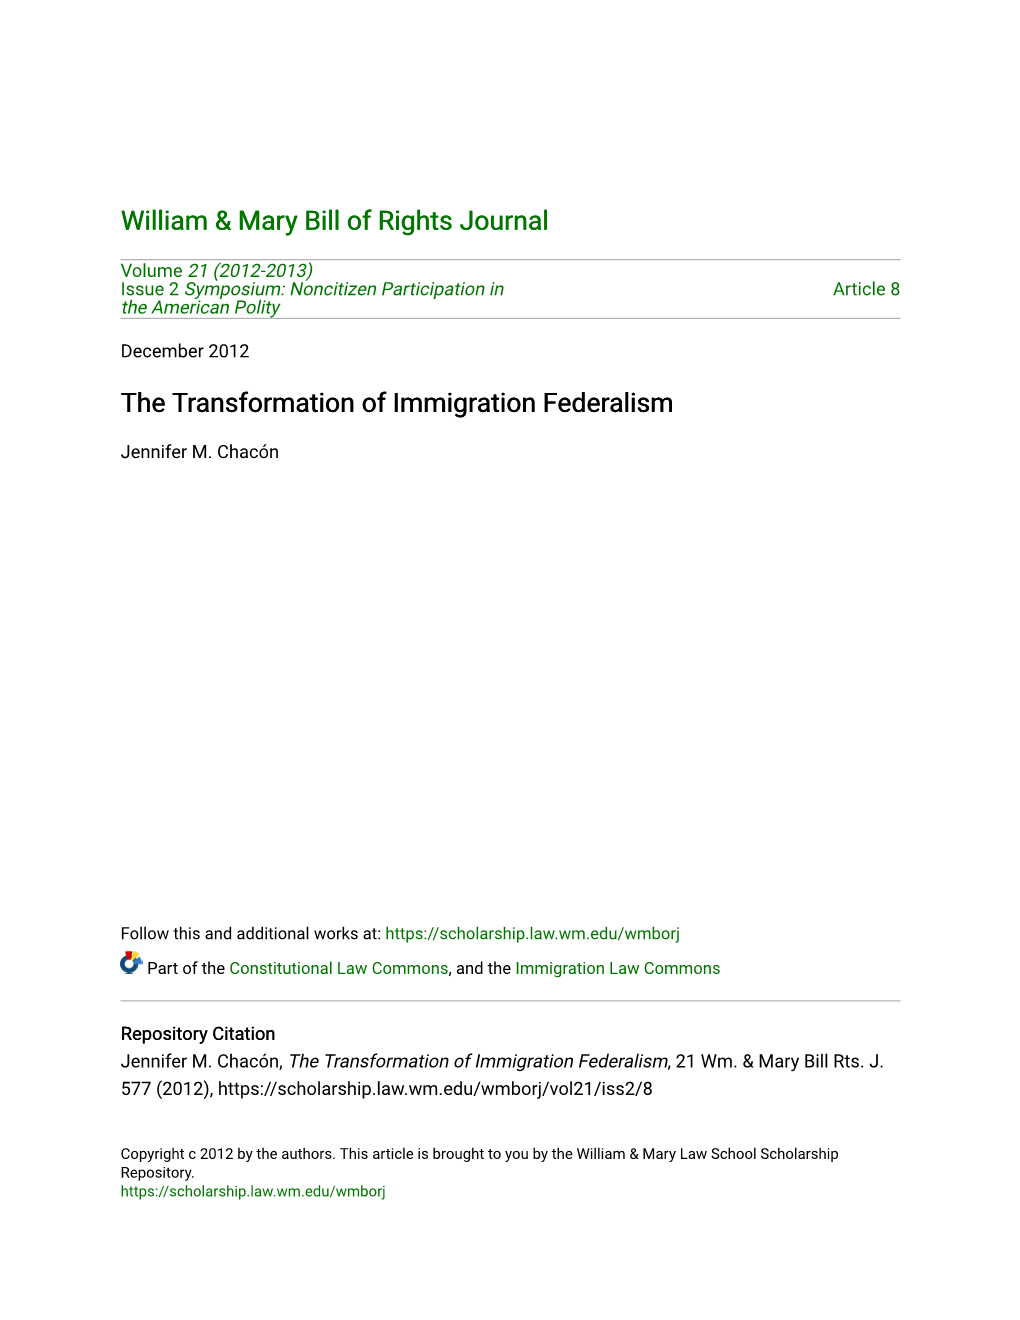 The Transformation of Immigration Federalism